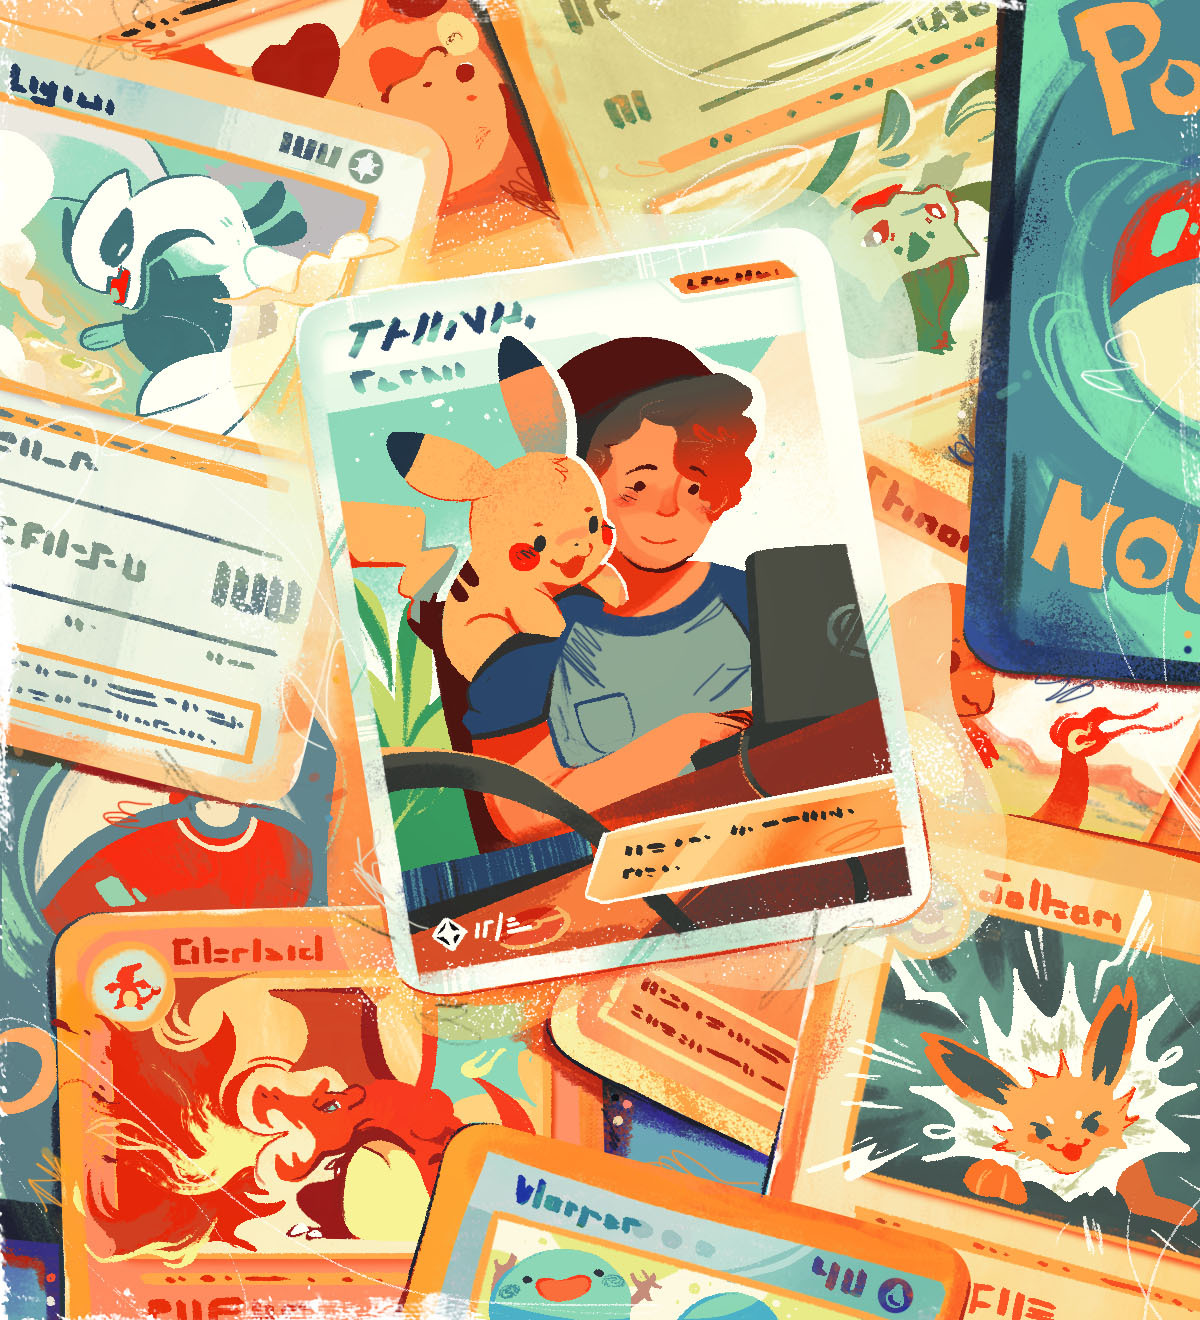 The Most Expensive Pokémon Card Costs More Than $5,000,000- Logan Paul's Pikachu  Illustrator Card is More